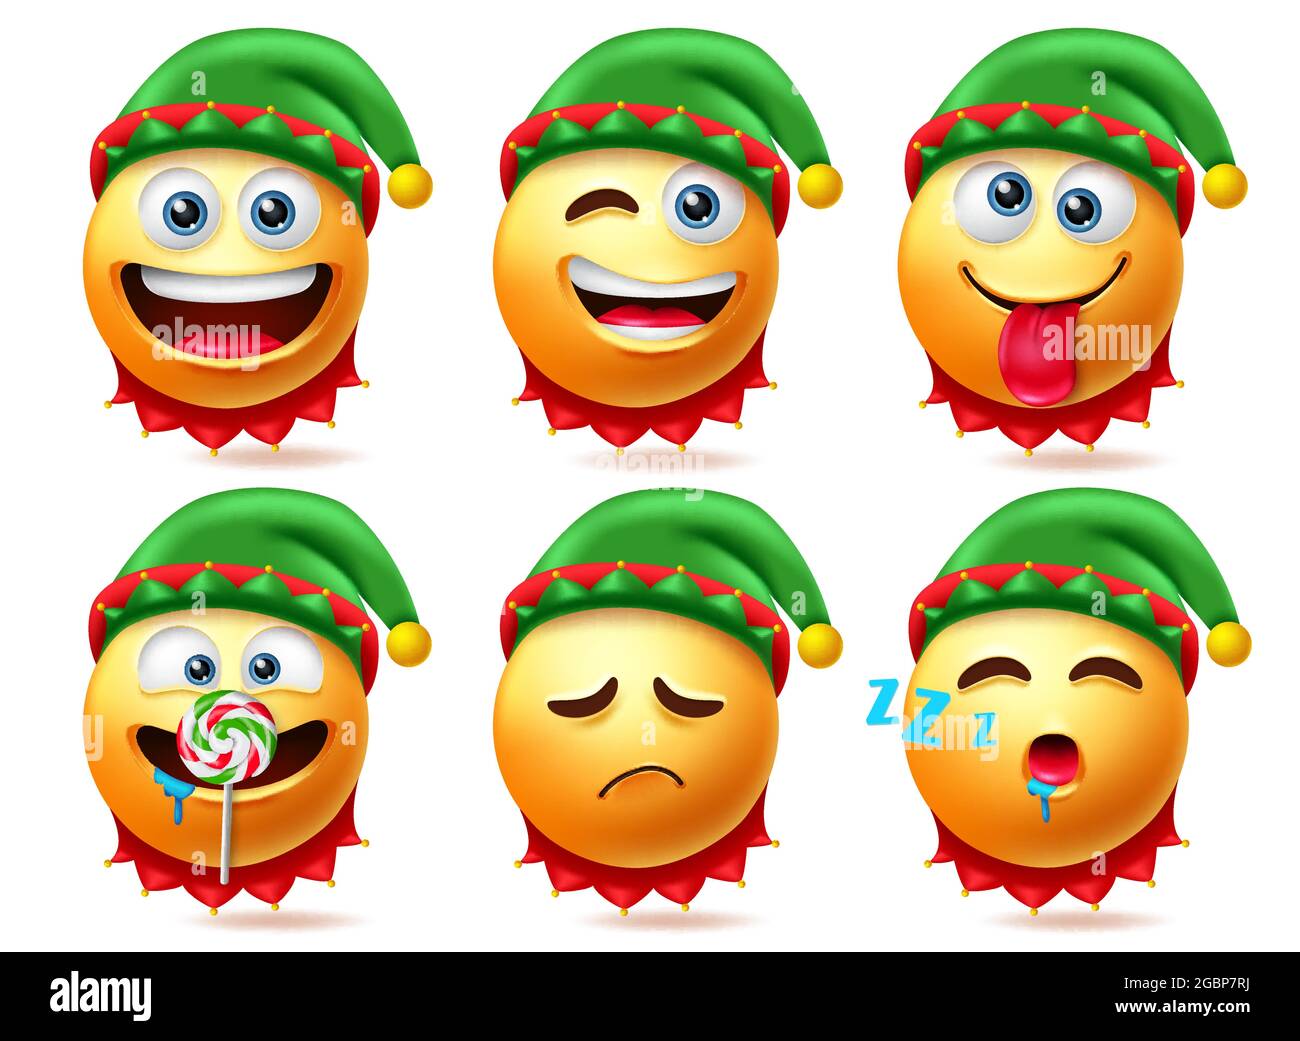 Elf smileys christmas character vector set. Elfs smiley characters in sleeping, eating and naughty facial expressions for xmas cute 3d emojis. Stock Vector